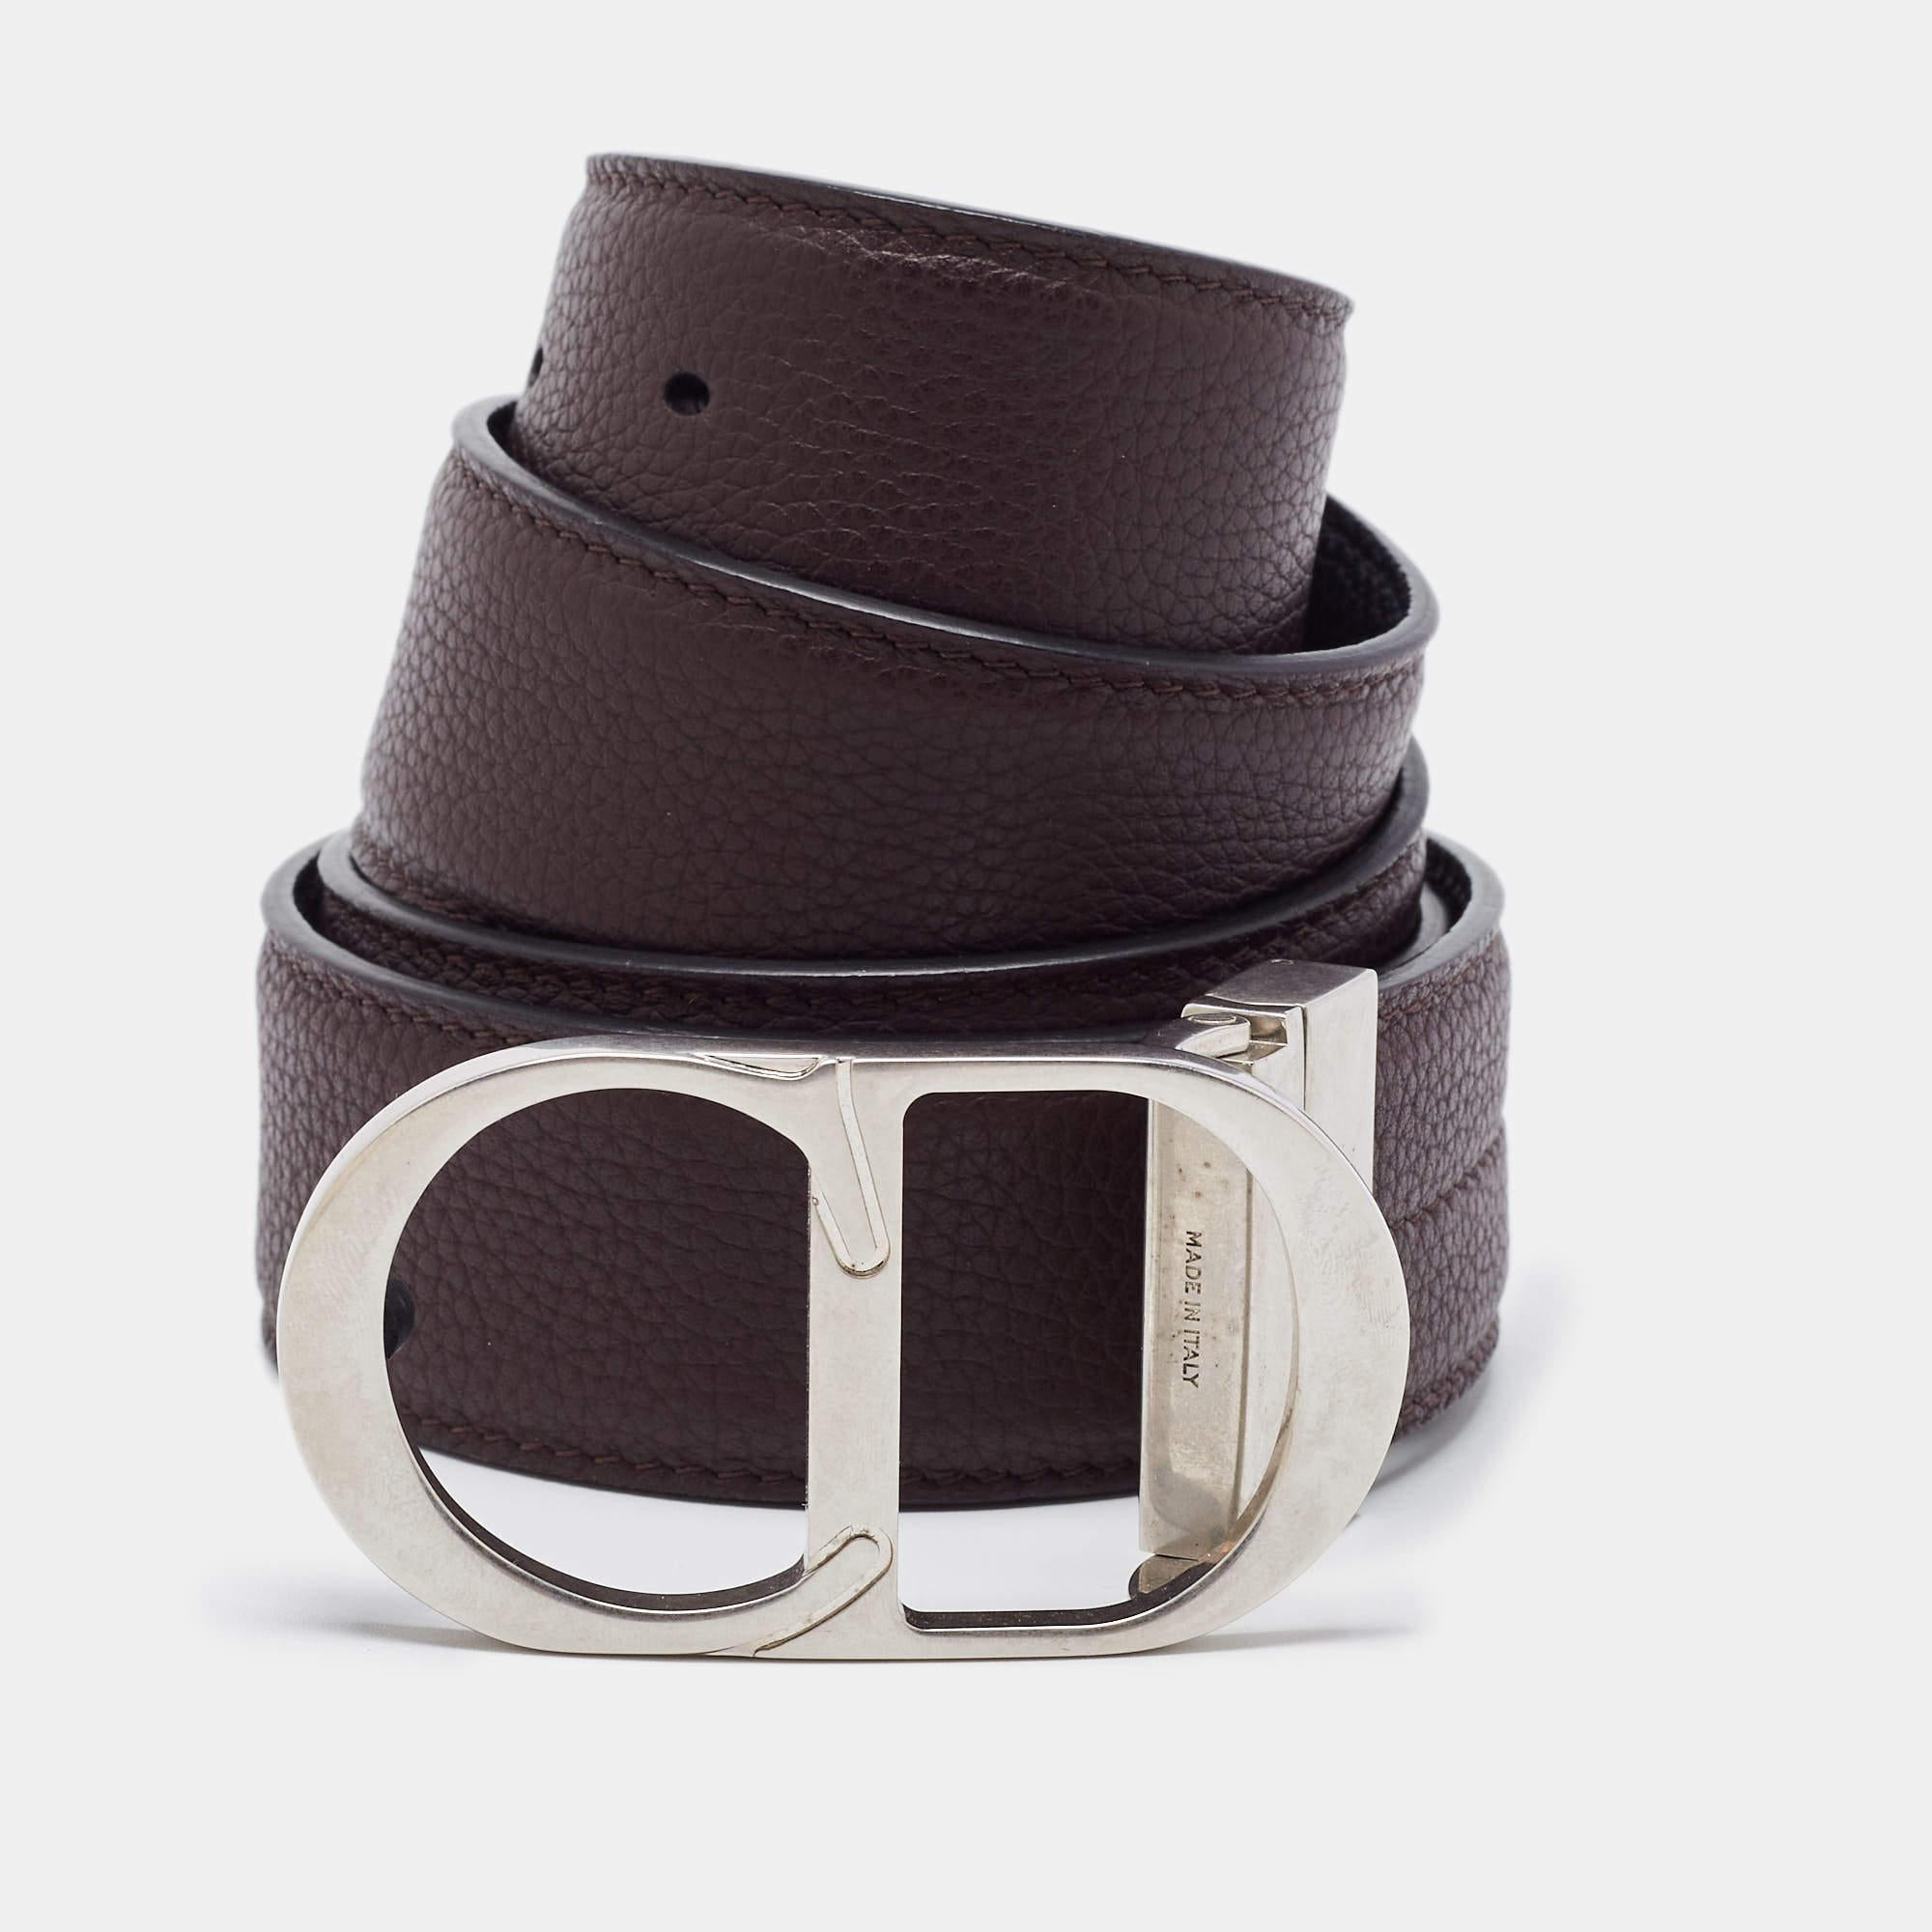 Belts are amazing accessories offering both functionality and style. If you're looking to add one, we have this fine choice by Dior. It has a luxe look and a beautiful finish.

